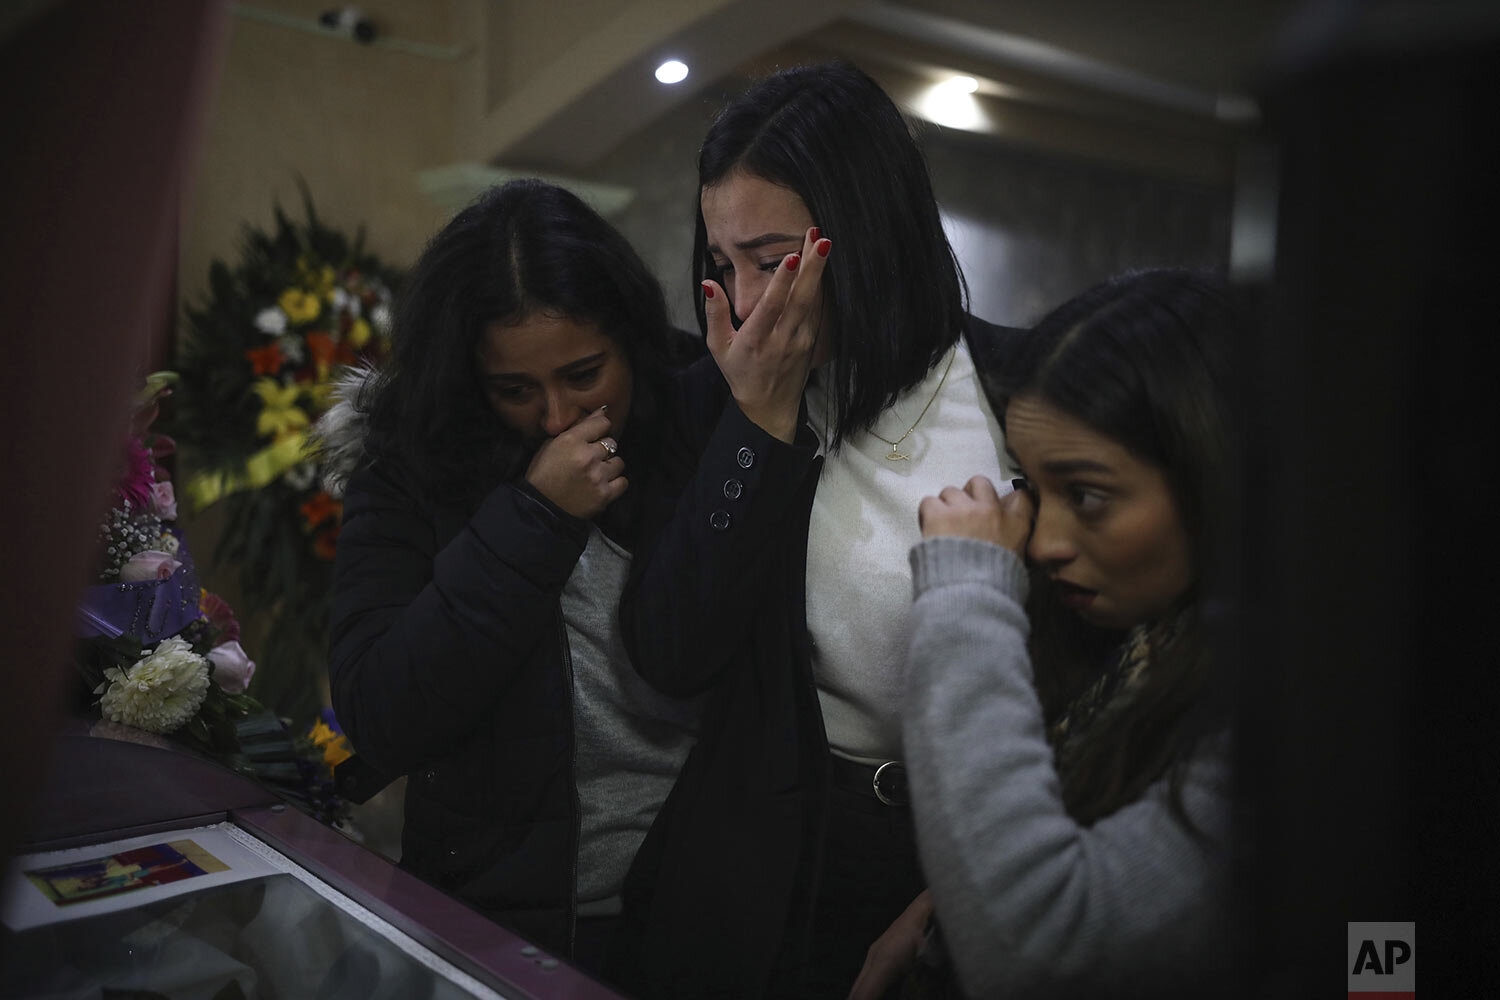  Mourners of slain woman Marbella Valdez grieve over her casket during her wake at a funeral home in Tijuana, Mexico, Friday, Feb. 14, 2020. (AP Photo/Emilio Espejel) 